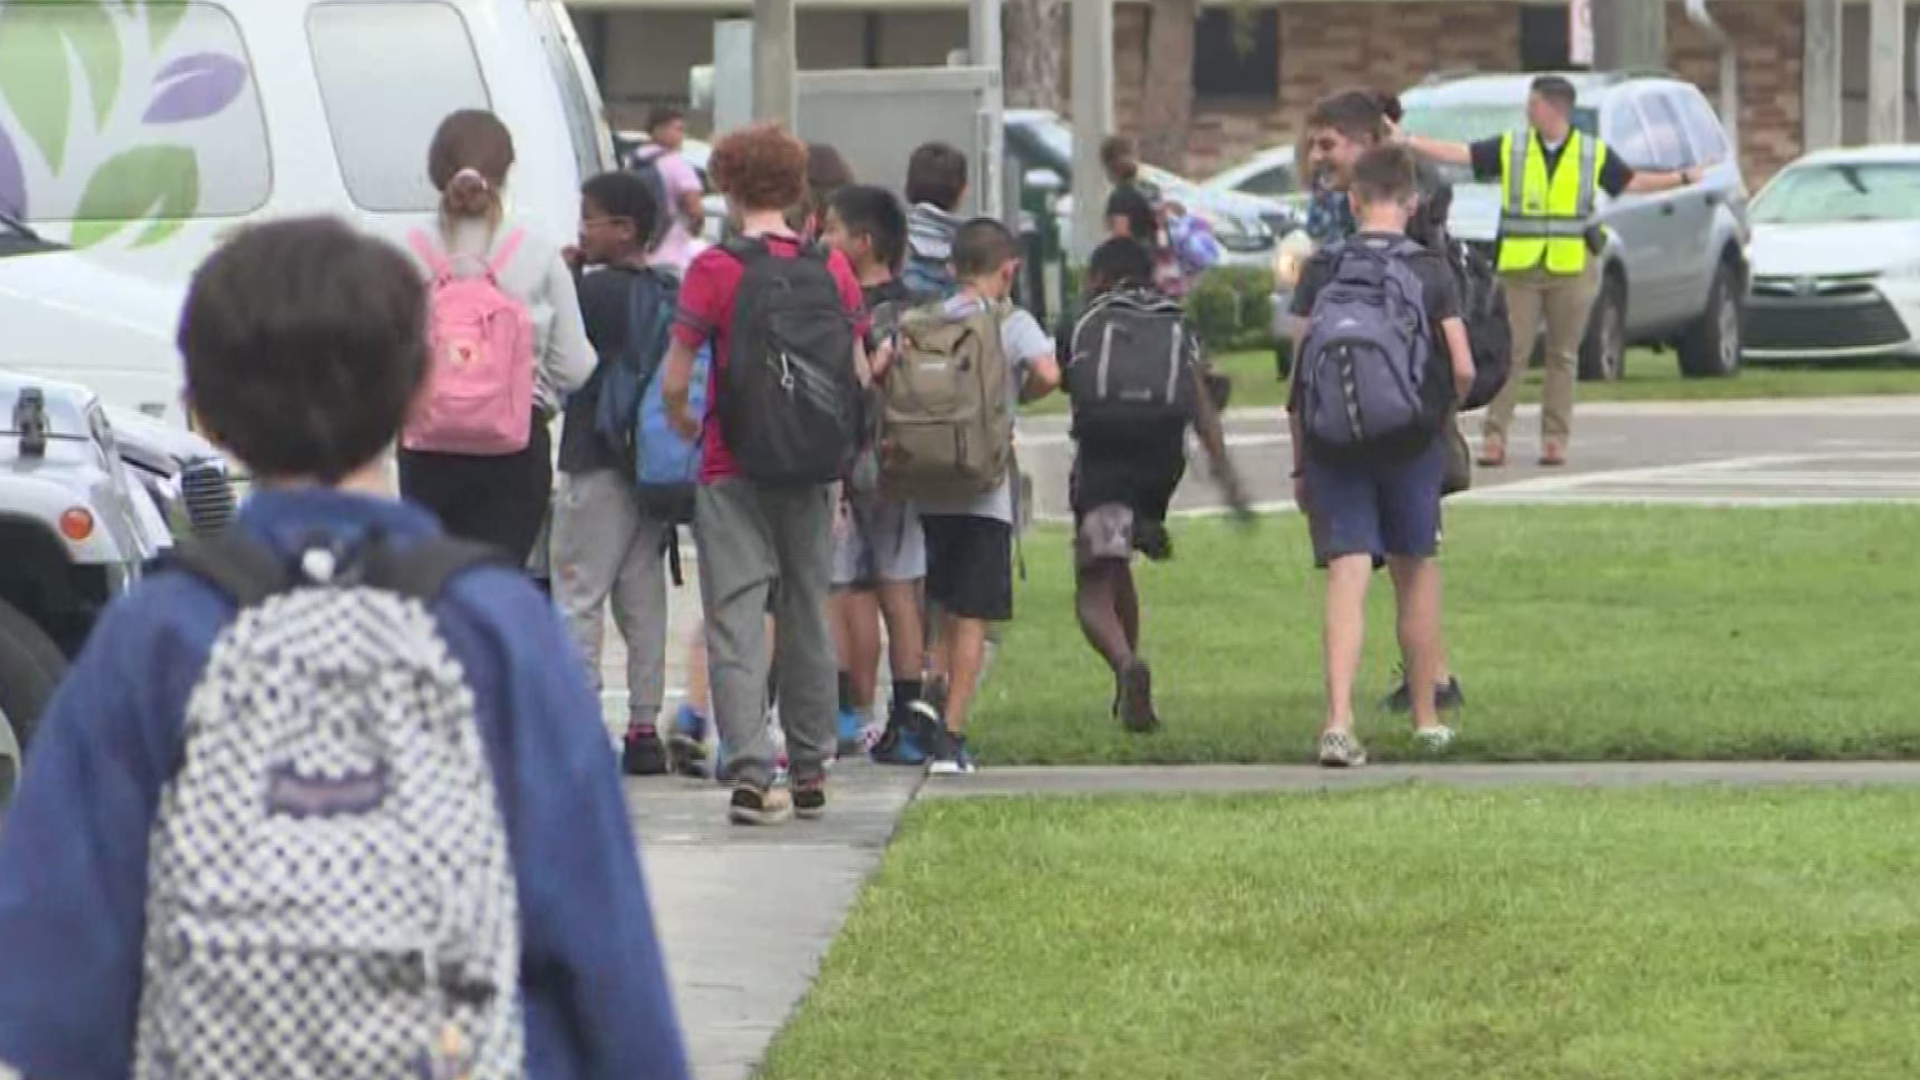 As students leave their social studies, science and math classes, hundreds of teachers are missing from the equation this year in Florida public schools.

10News called districts across the Tampa Bay area and found we're currently short about 700 teachers. Right now, there are 102 job openings in Pasco County, 120 in Polk County and 244 in Hillsborough County. https://on.wtsp.com/2OWfo32